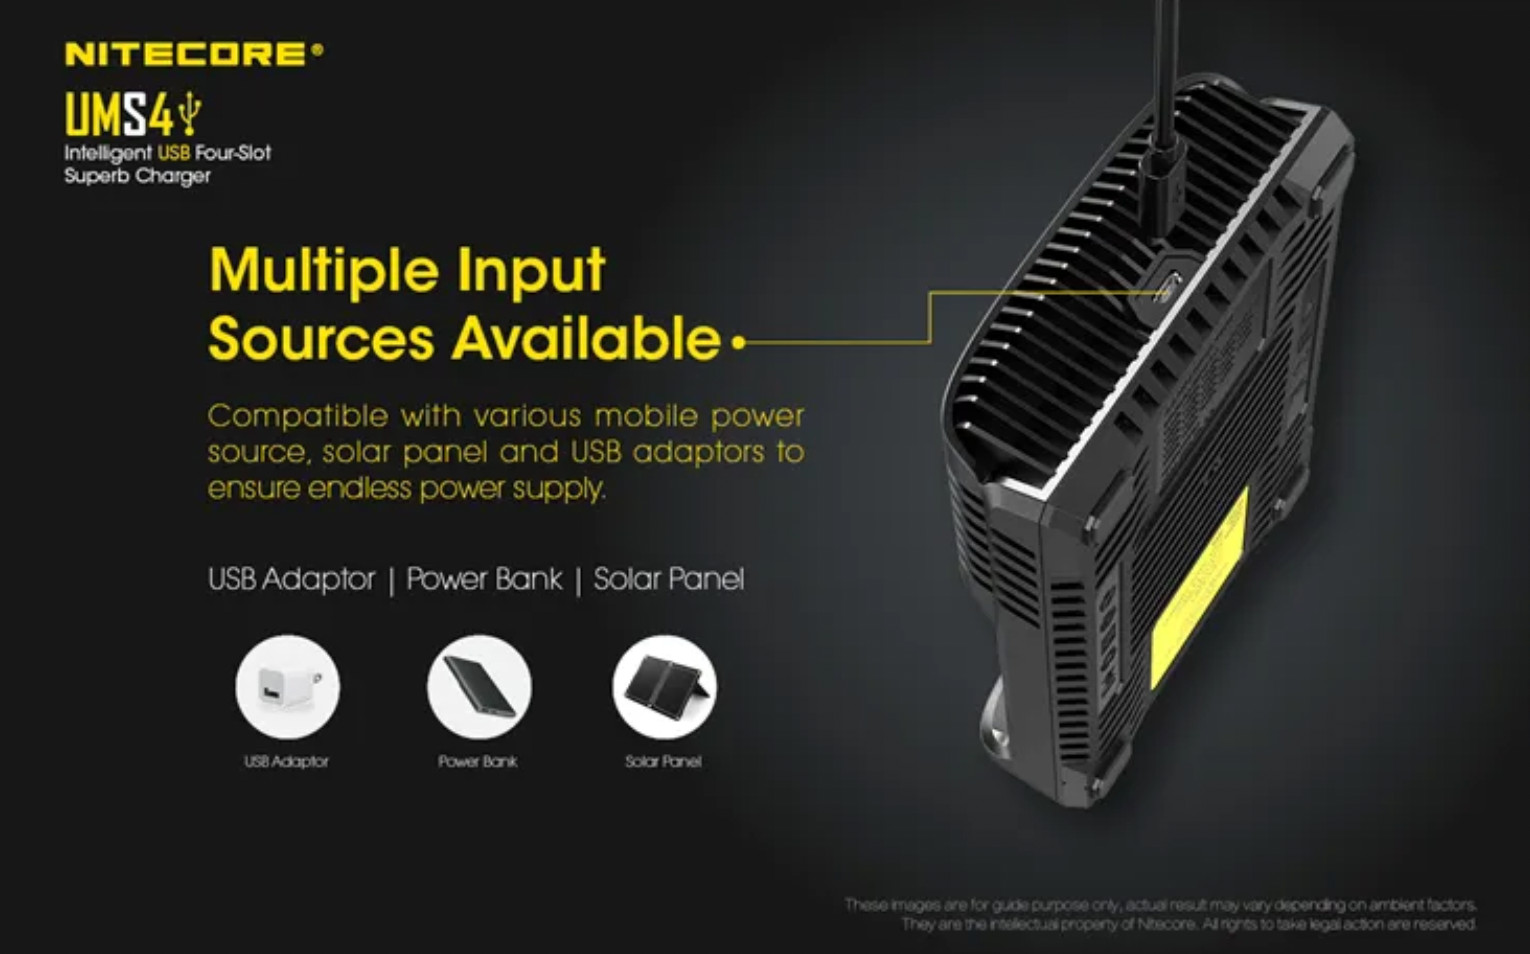 Nitecore UMS4 USB Charger - RPI Supplies